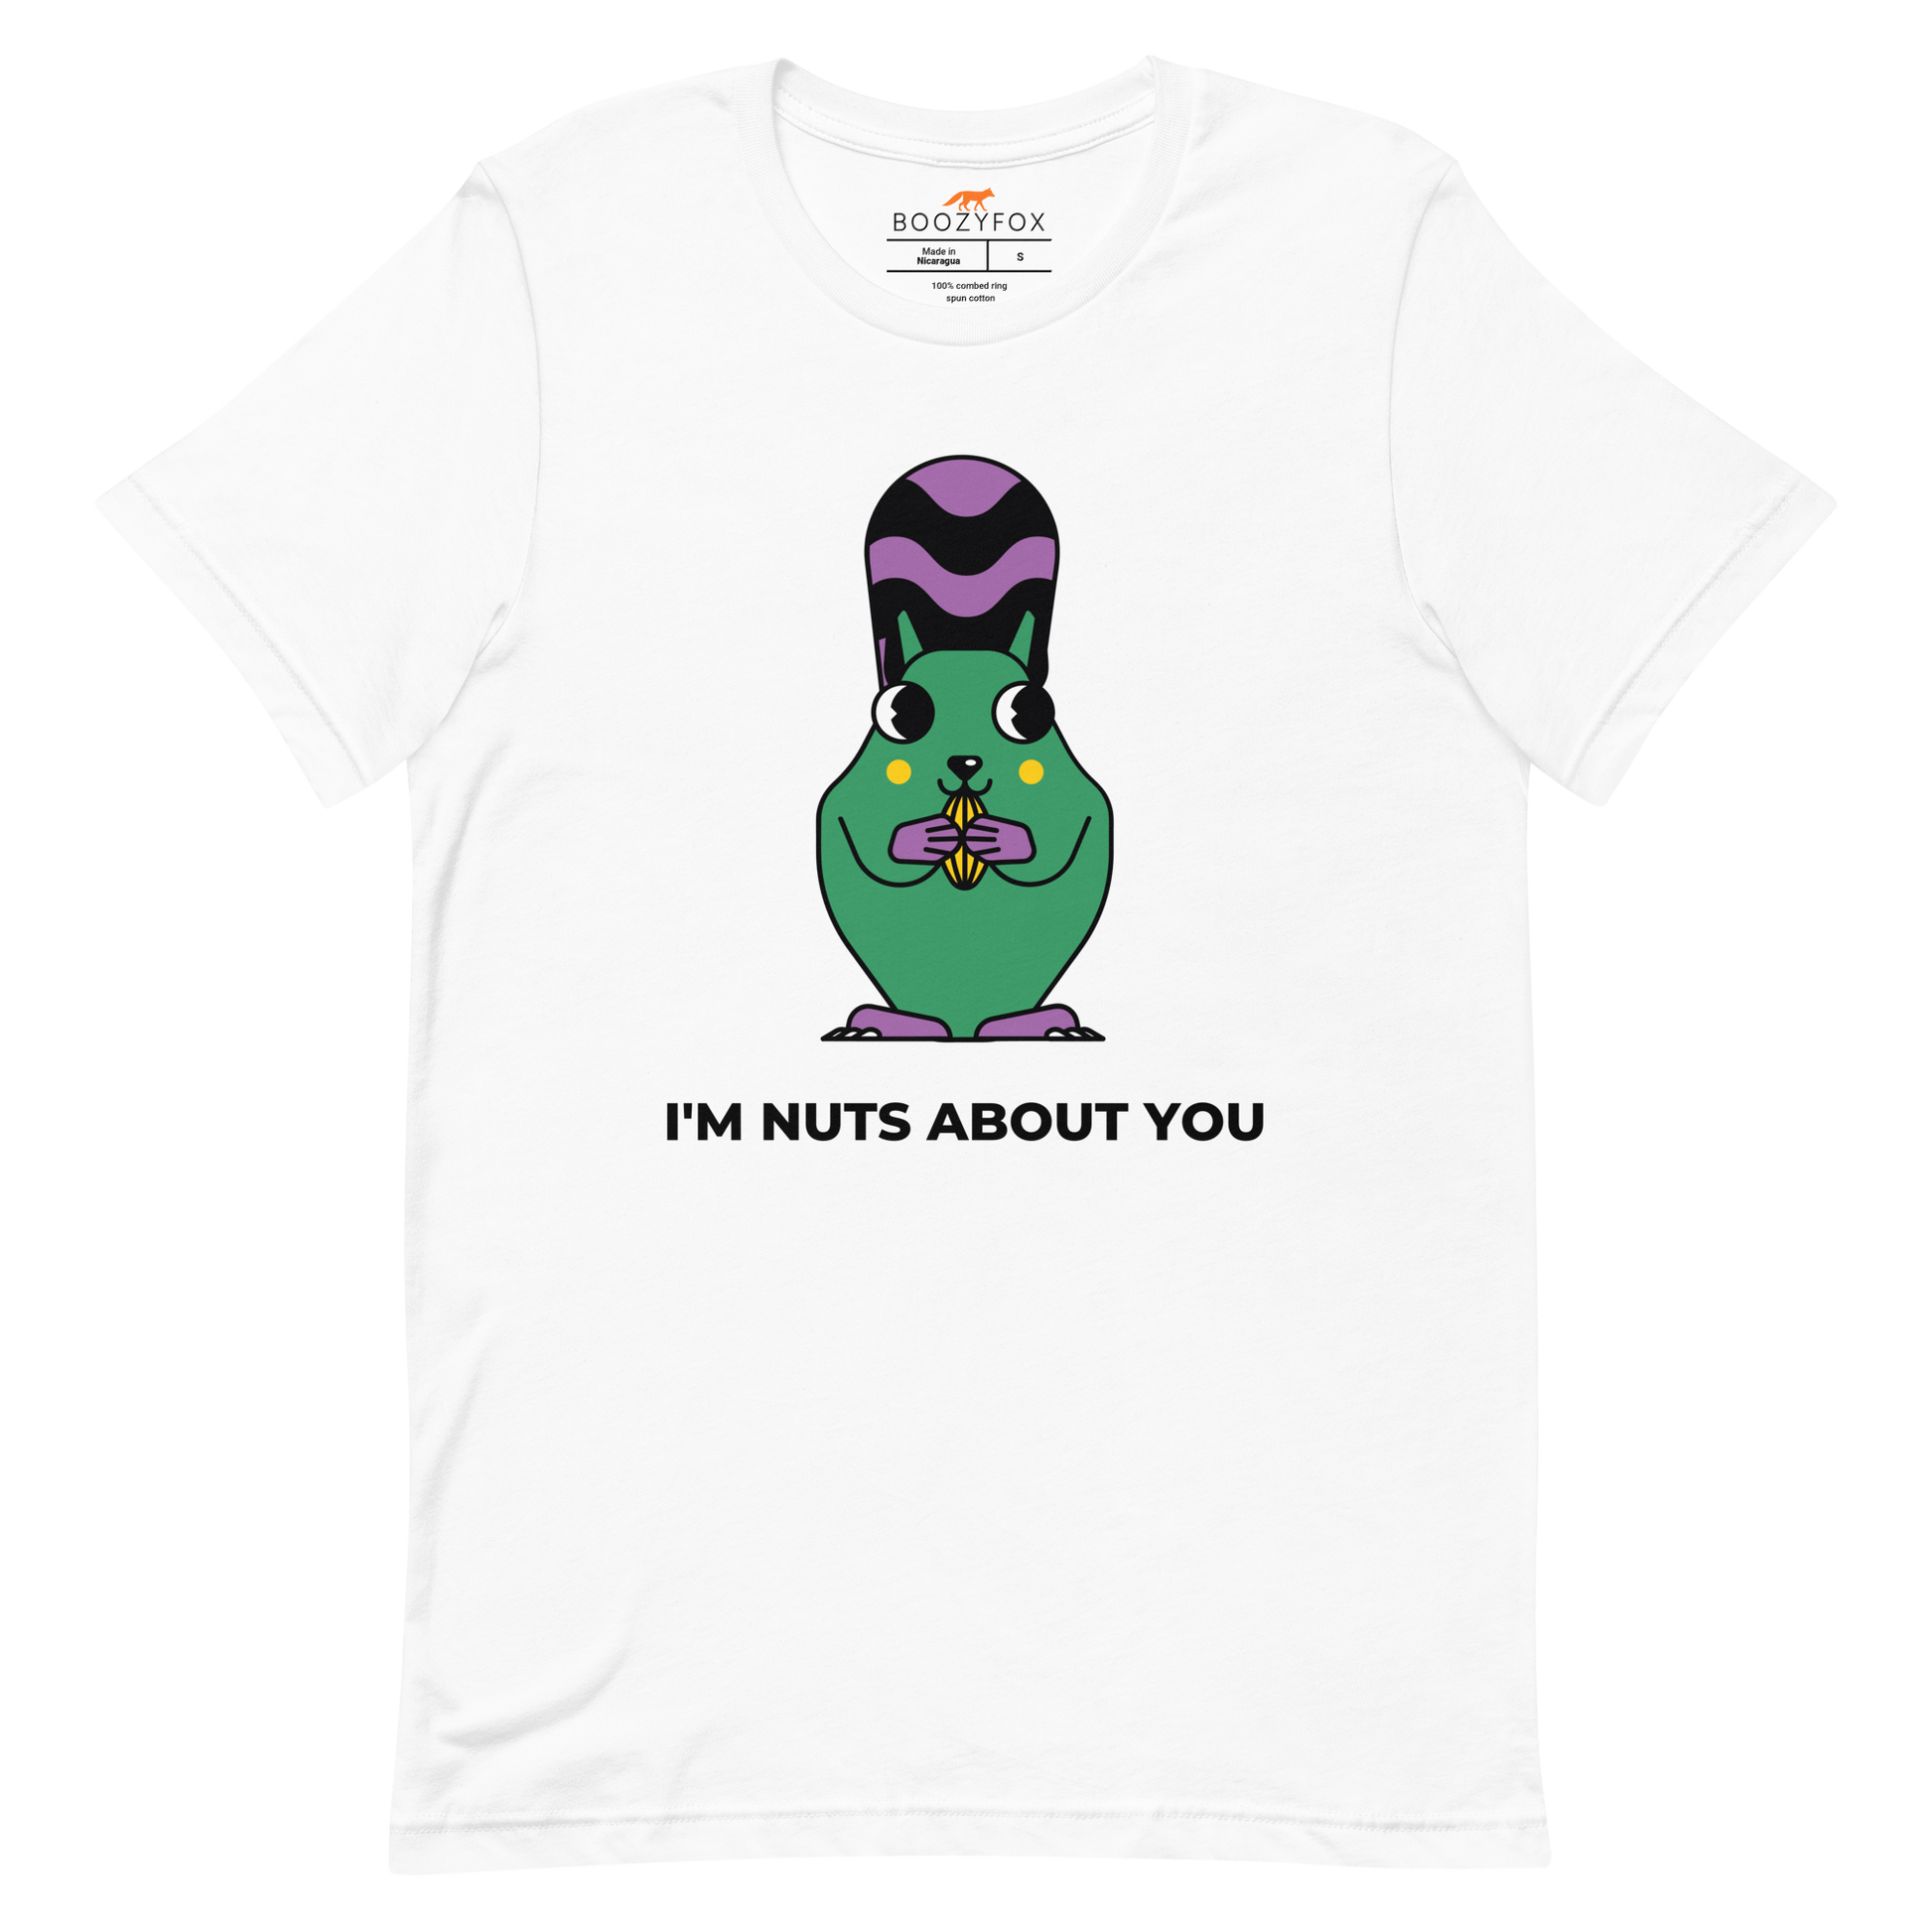 White Premium Squirrel T-Shirt featuring an I'm Nuts About You graphic on the chest - Funny Graphic Squirrel Tees - Boozy Fox